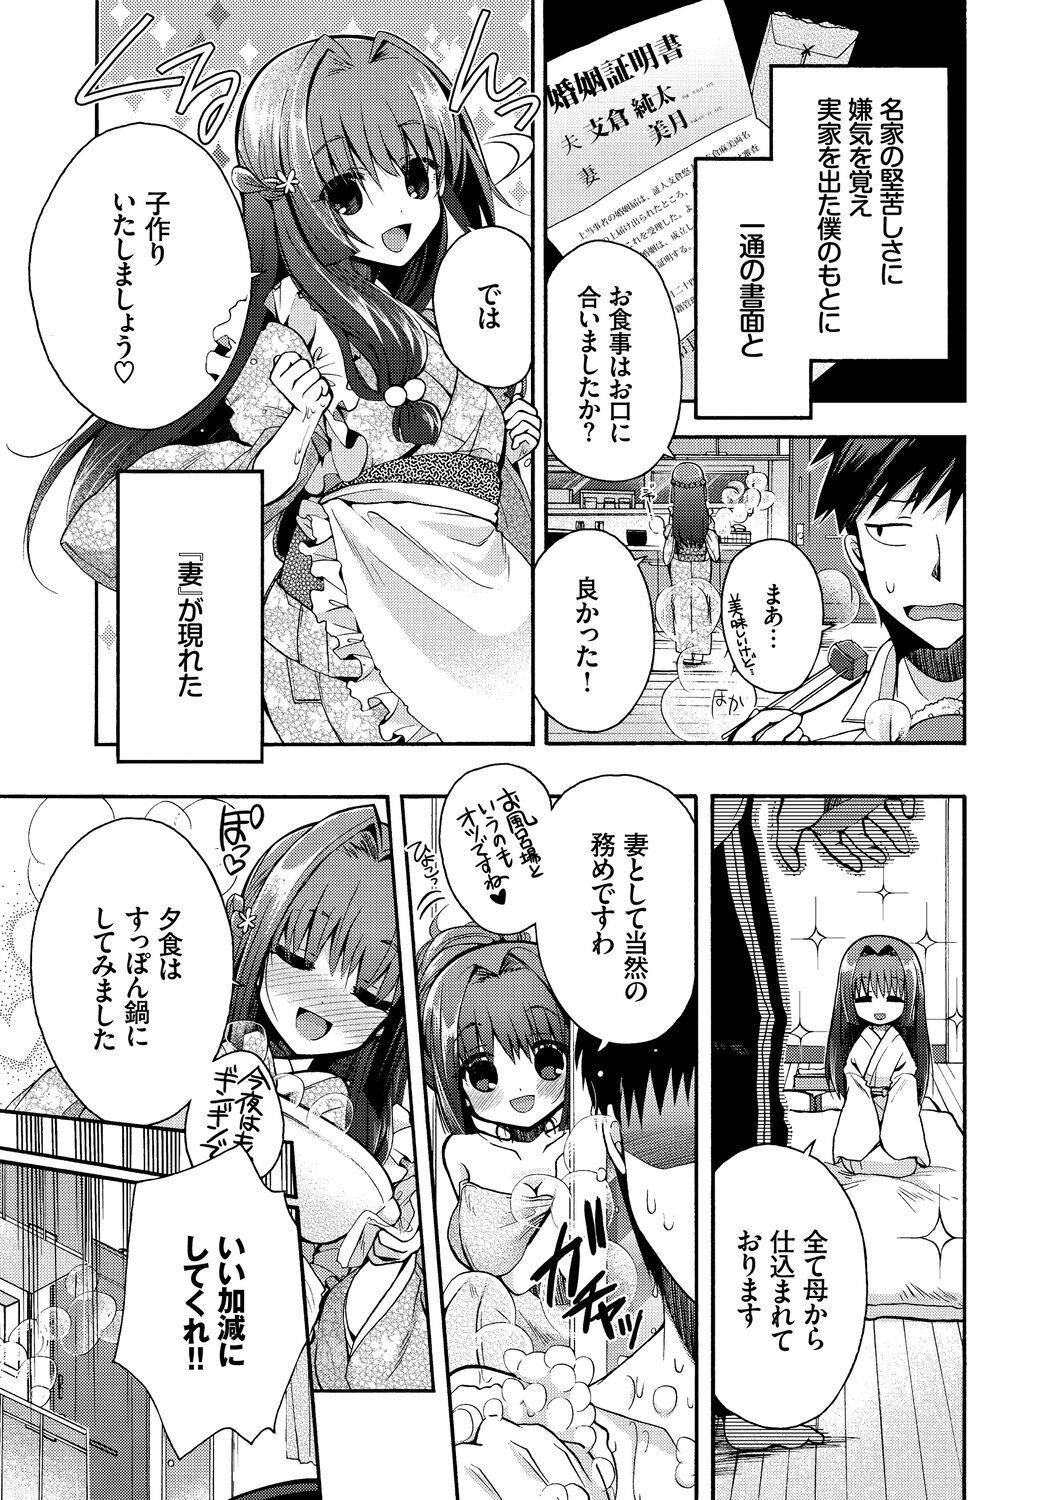 Hatsukoi Melty - Melty First Love 176